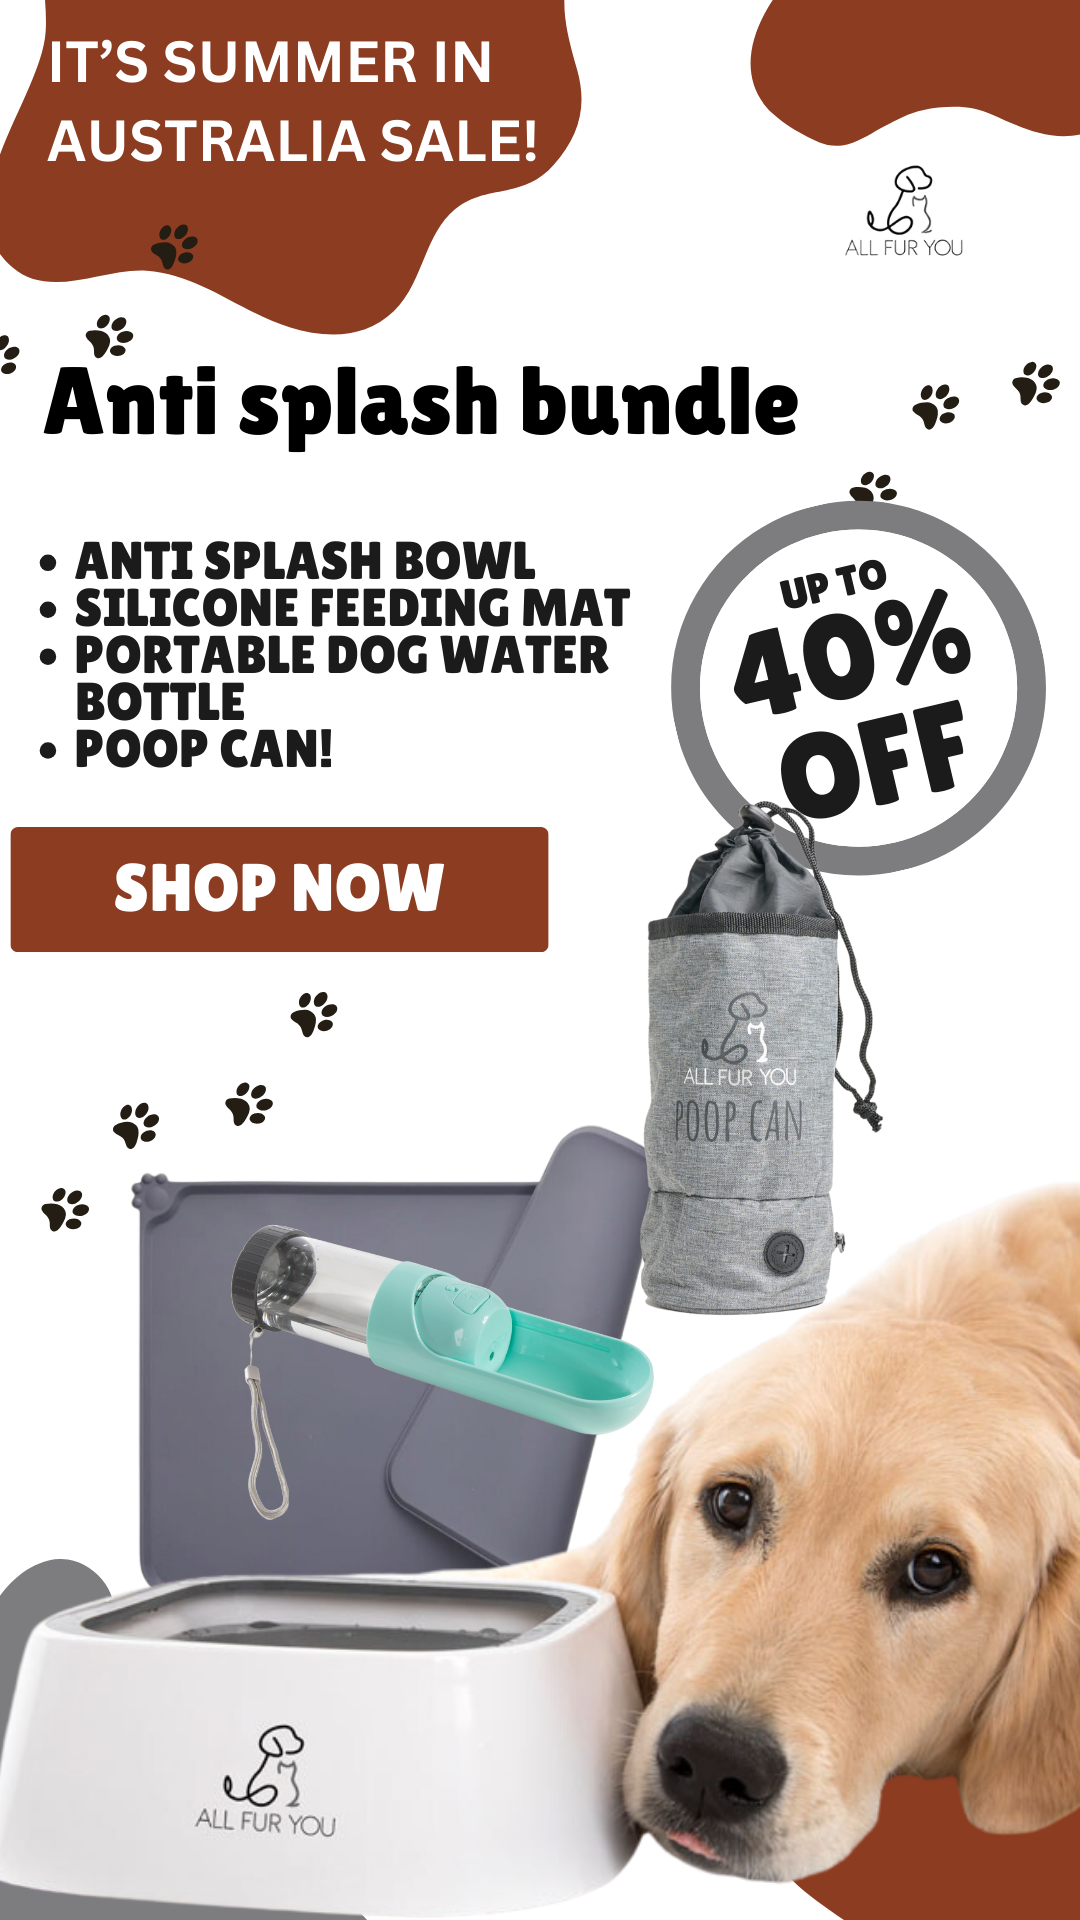 Spill Proof Dog Bowl, Silicone Mat, Water Bottle Poop Can bundle